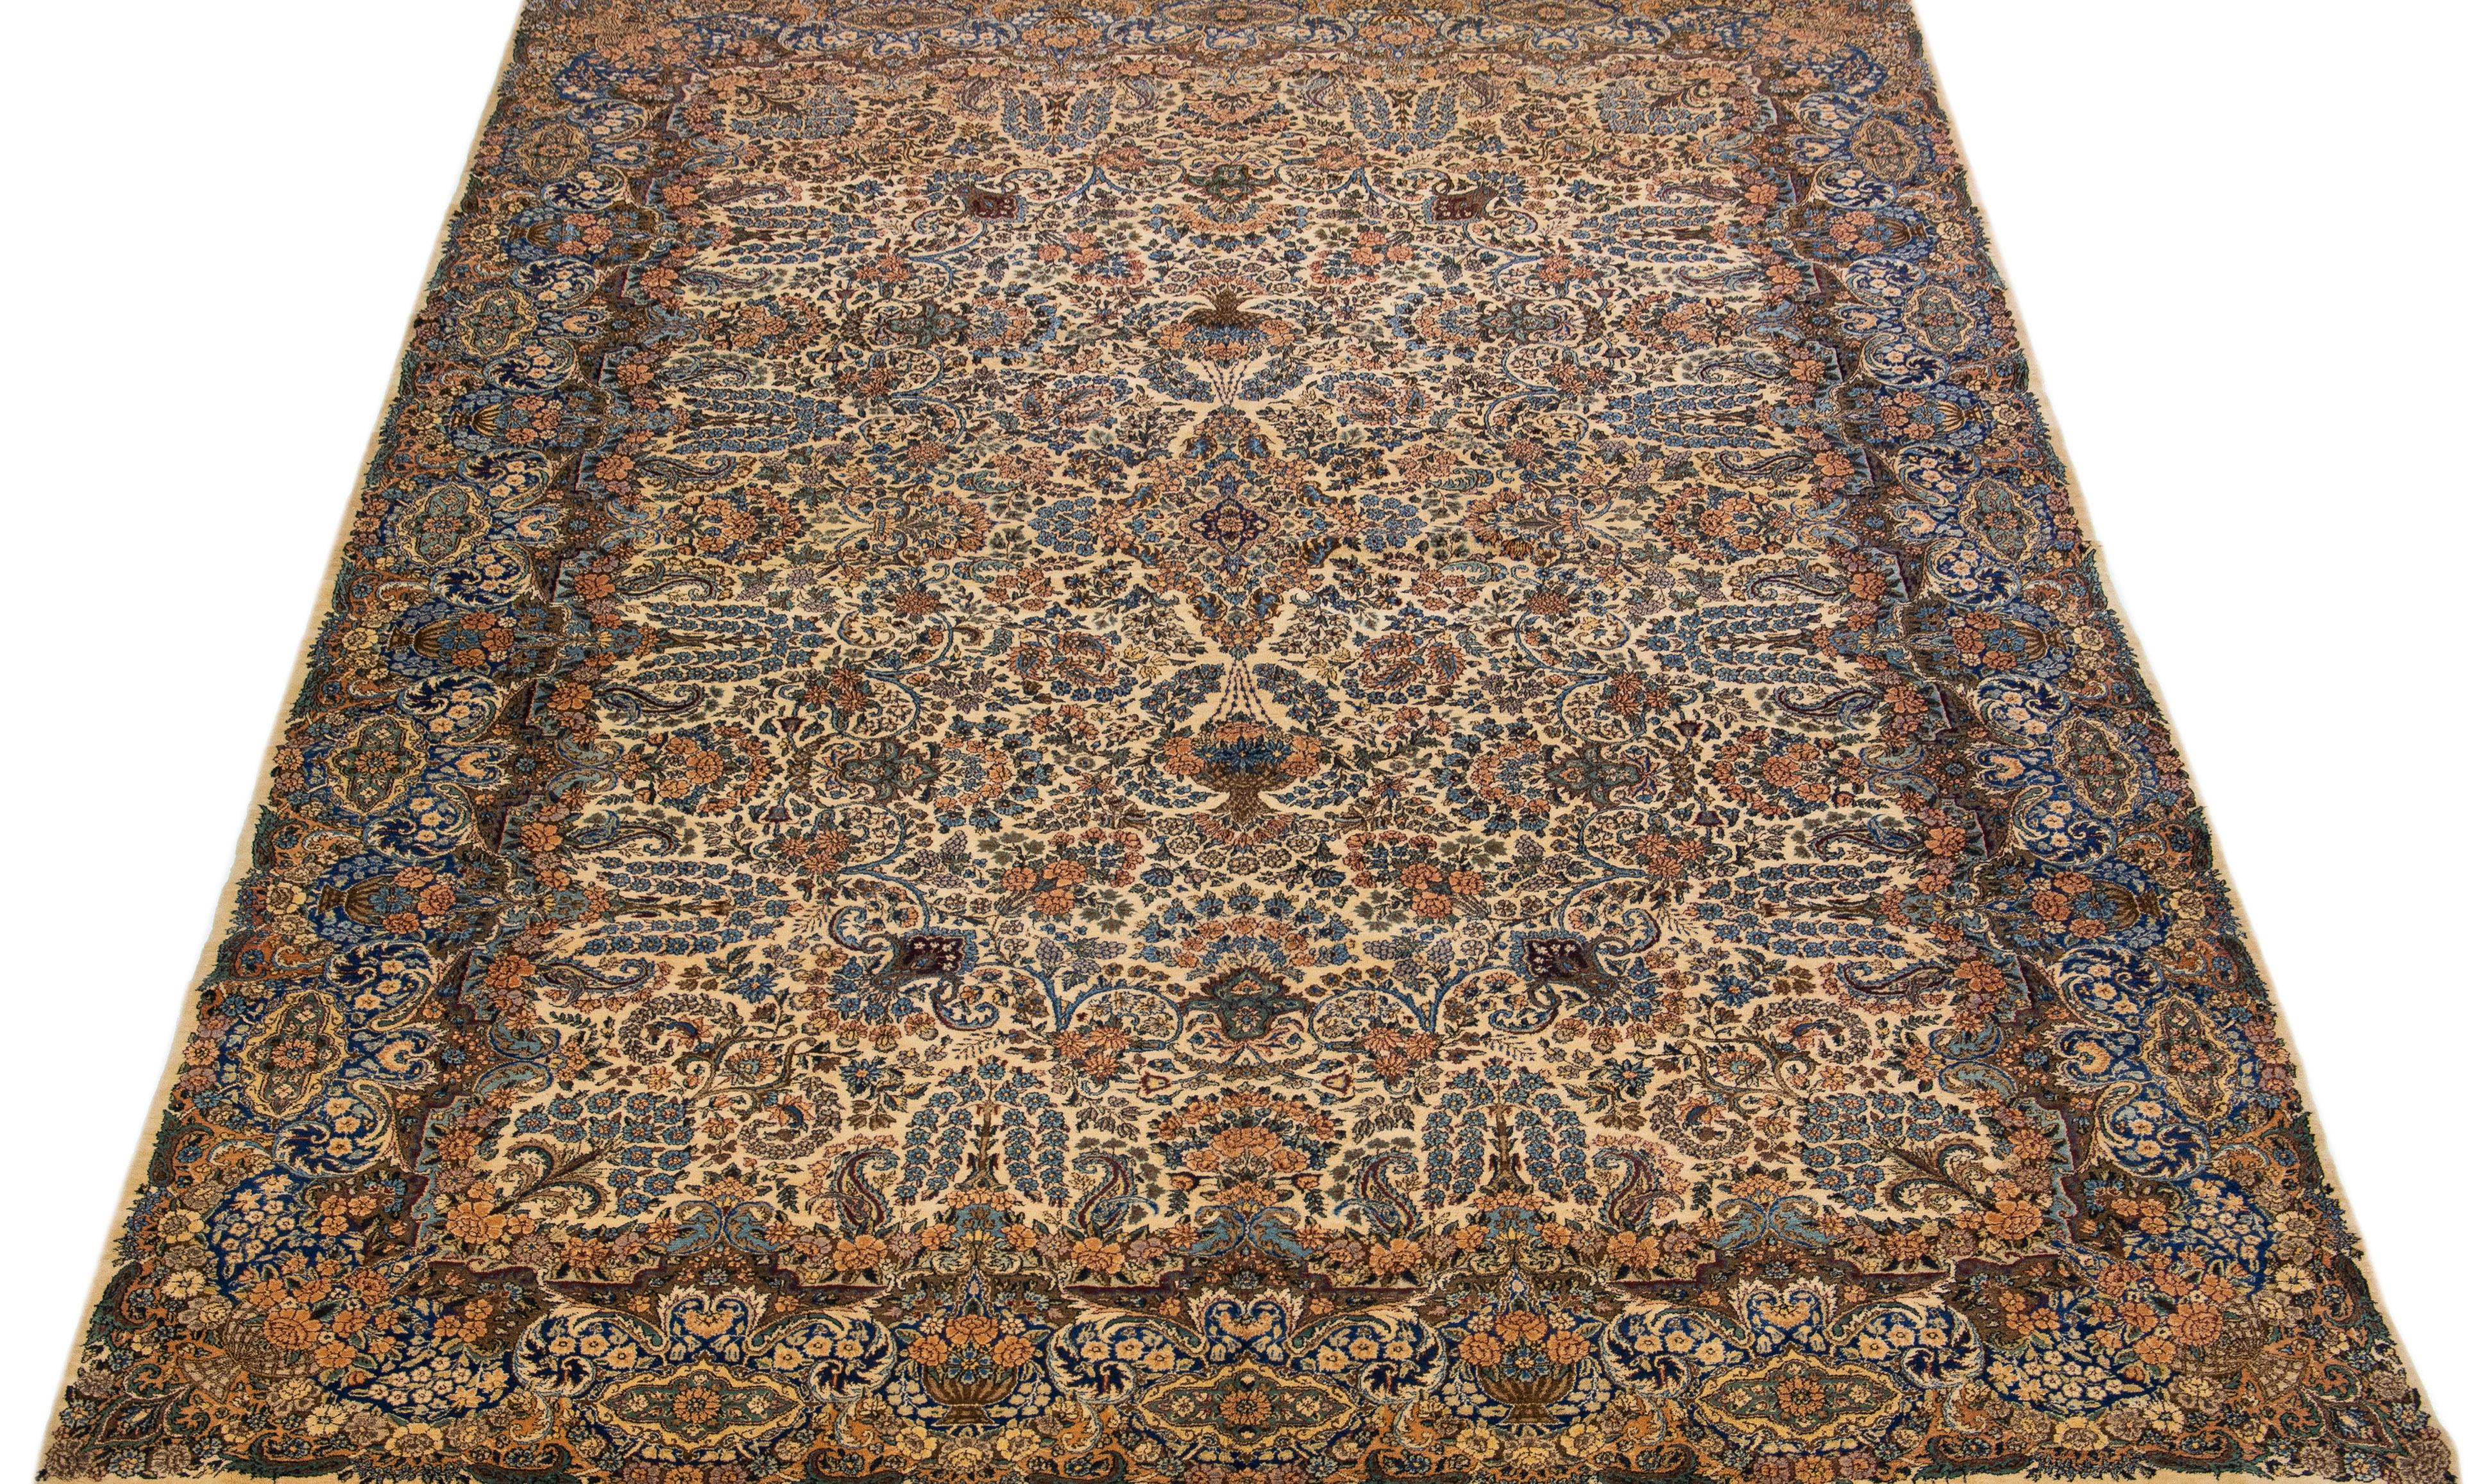 Beautiful antique Kerman hand-knotted wool rug with a beige color field. This Persian rug has multicolor accents in a gorgeous all-over medallion floral design.

This rug measures 9'8 x 13'9